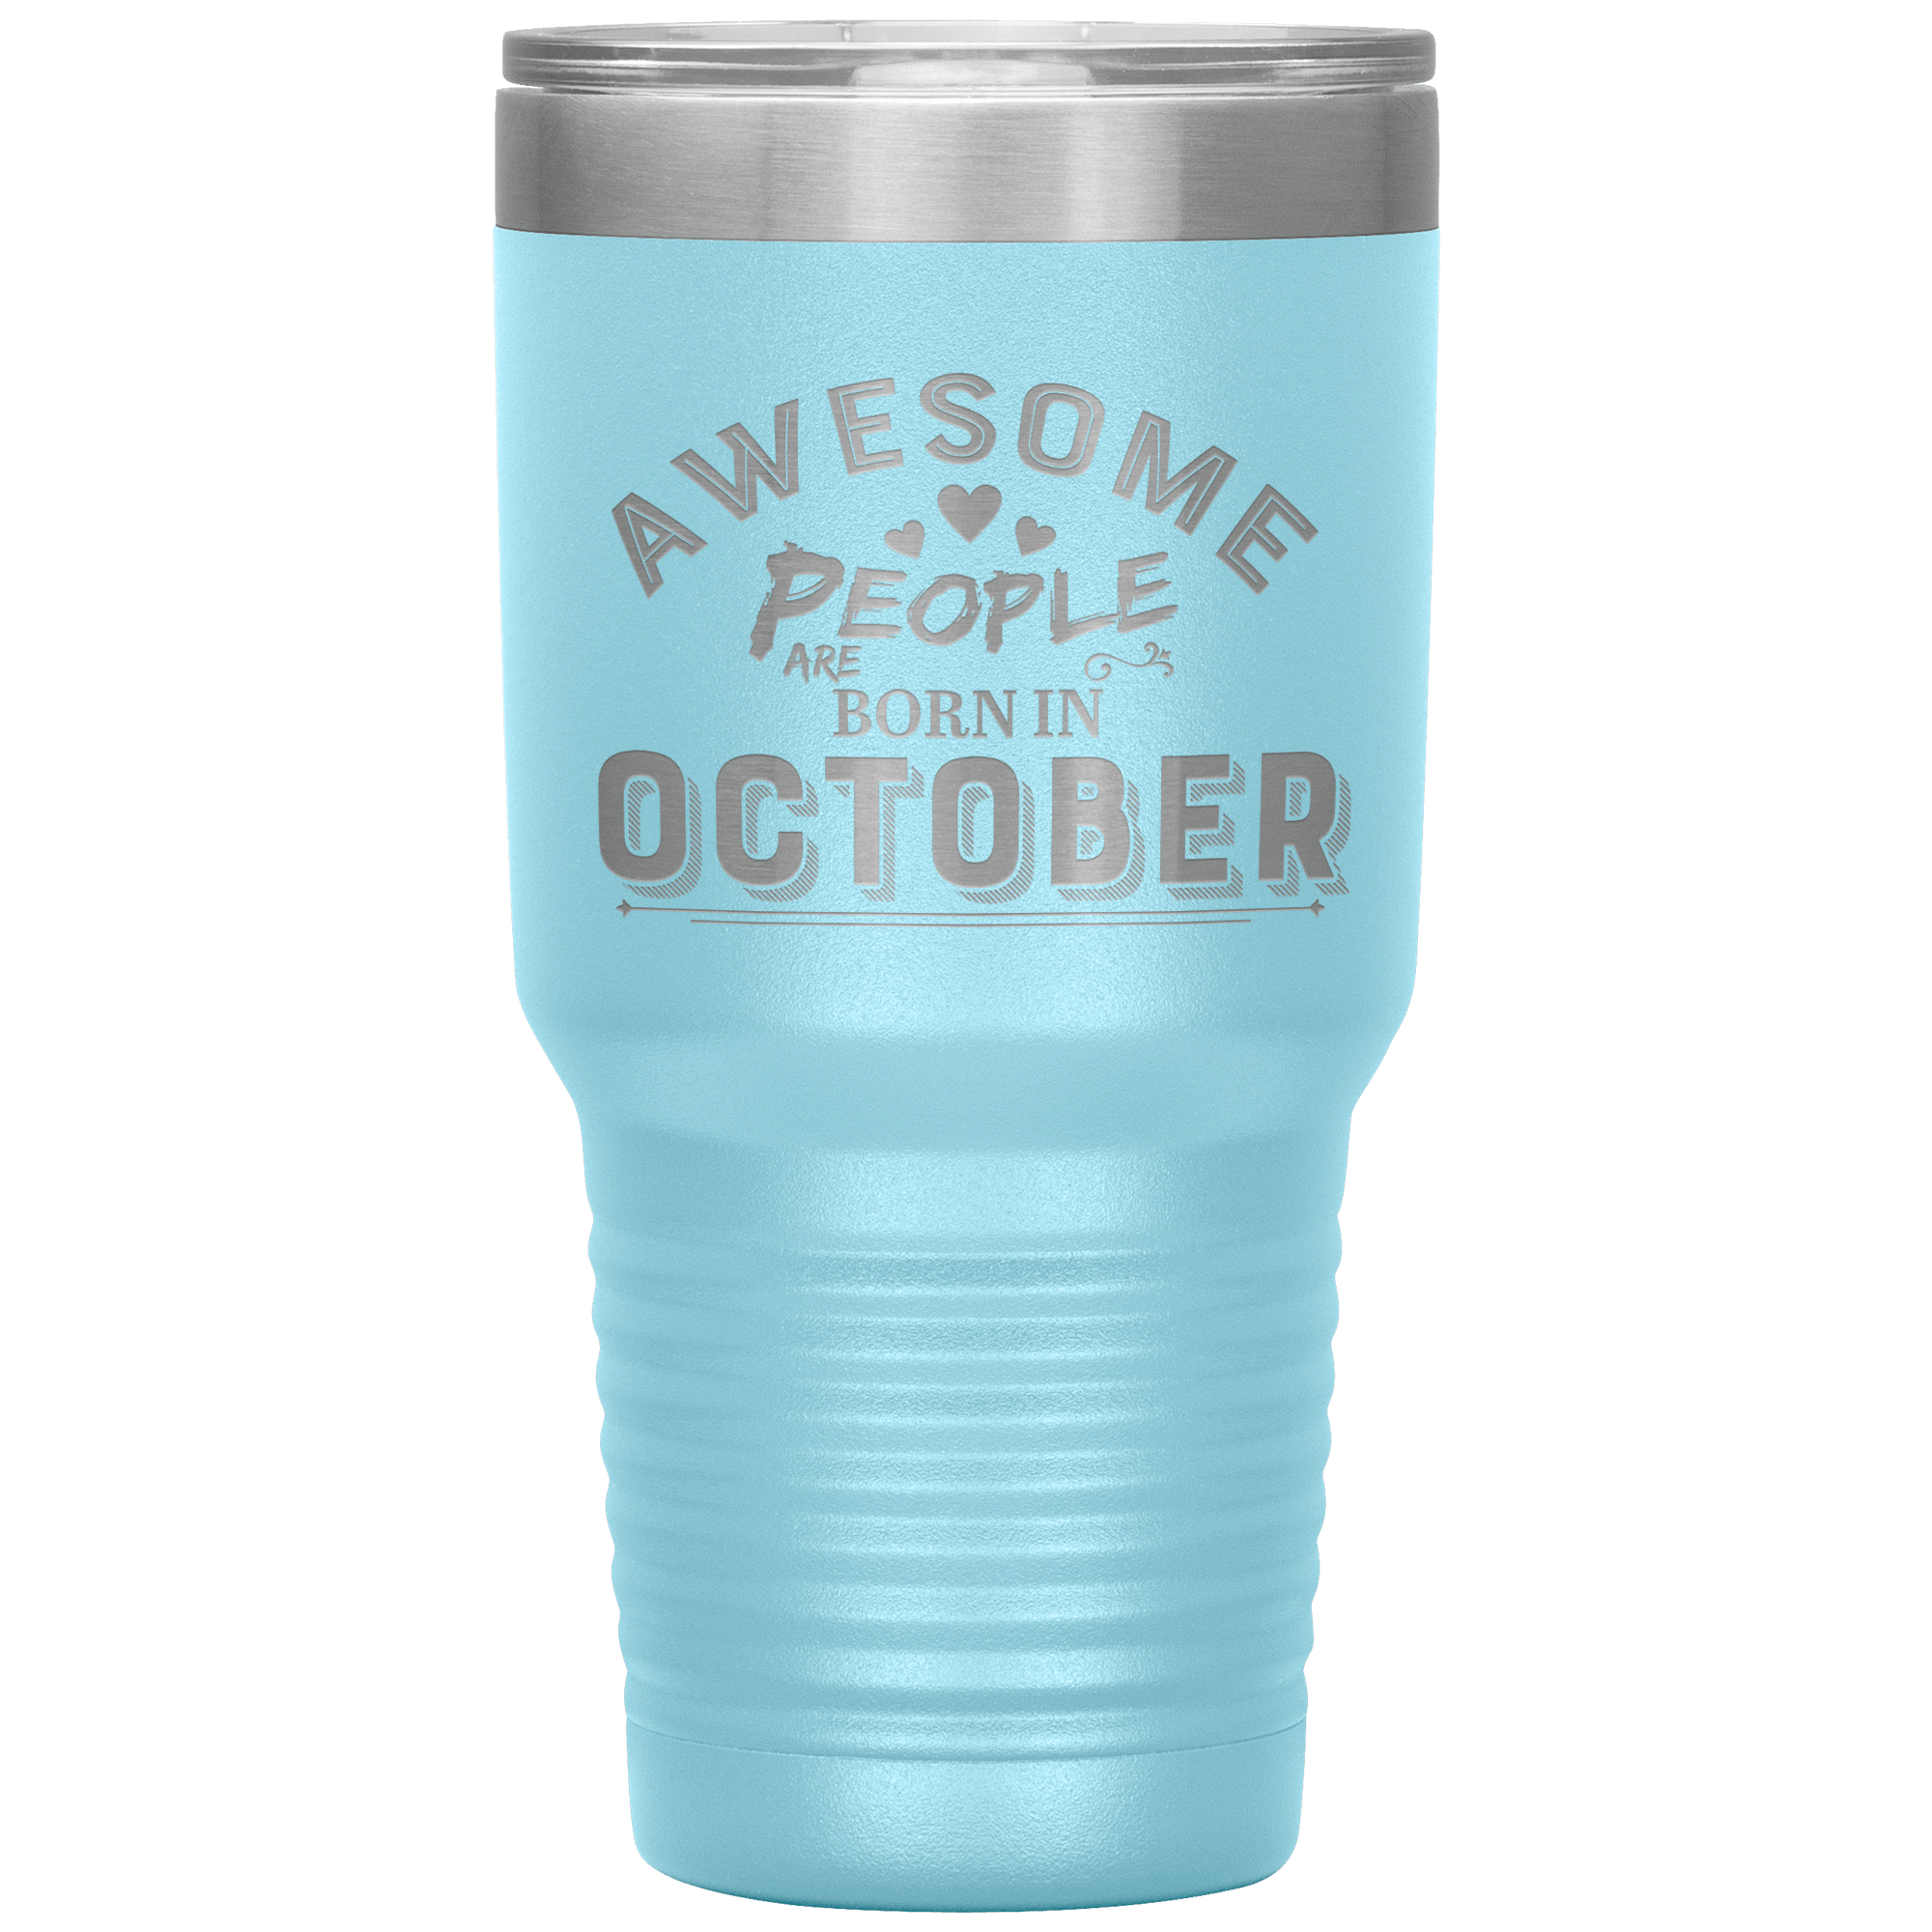 "AWESOME PEOPLE ARE BORN IN OCTOBER" Tumbler